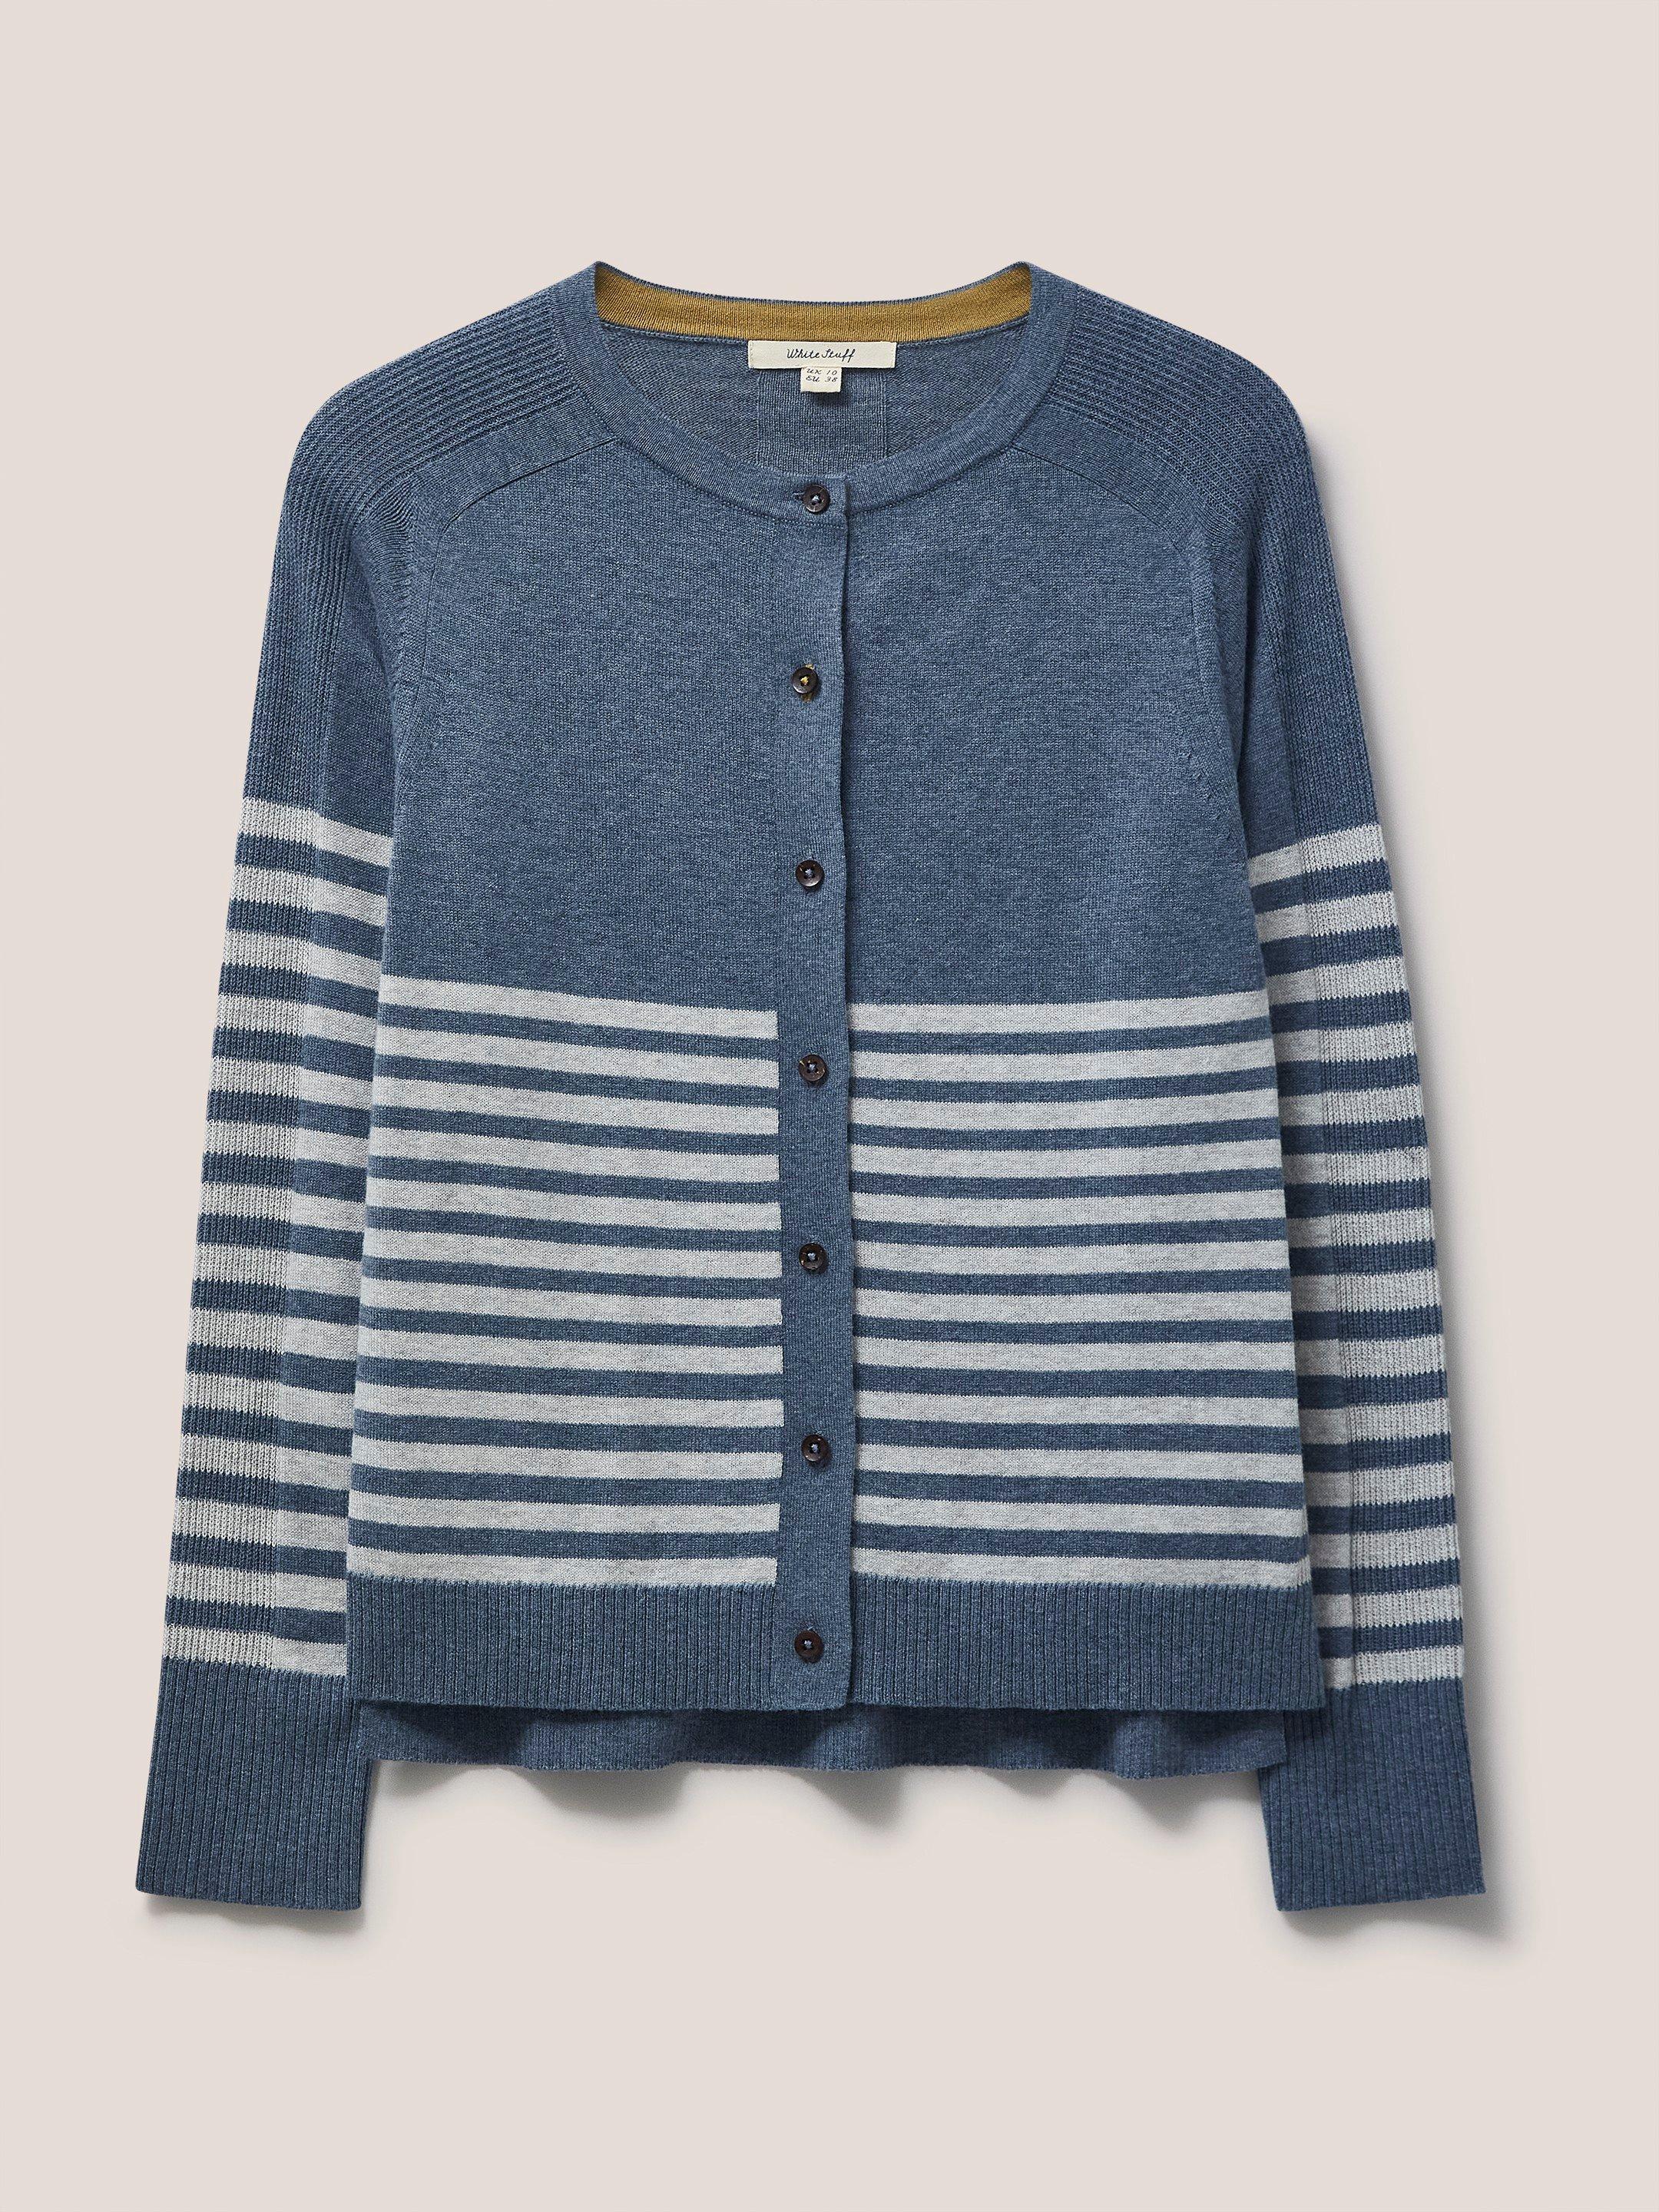 Libby Crew Neck Stripe Cardi in BLUE MLT - FLAT FRONT